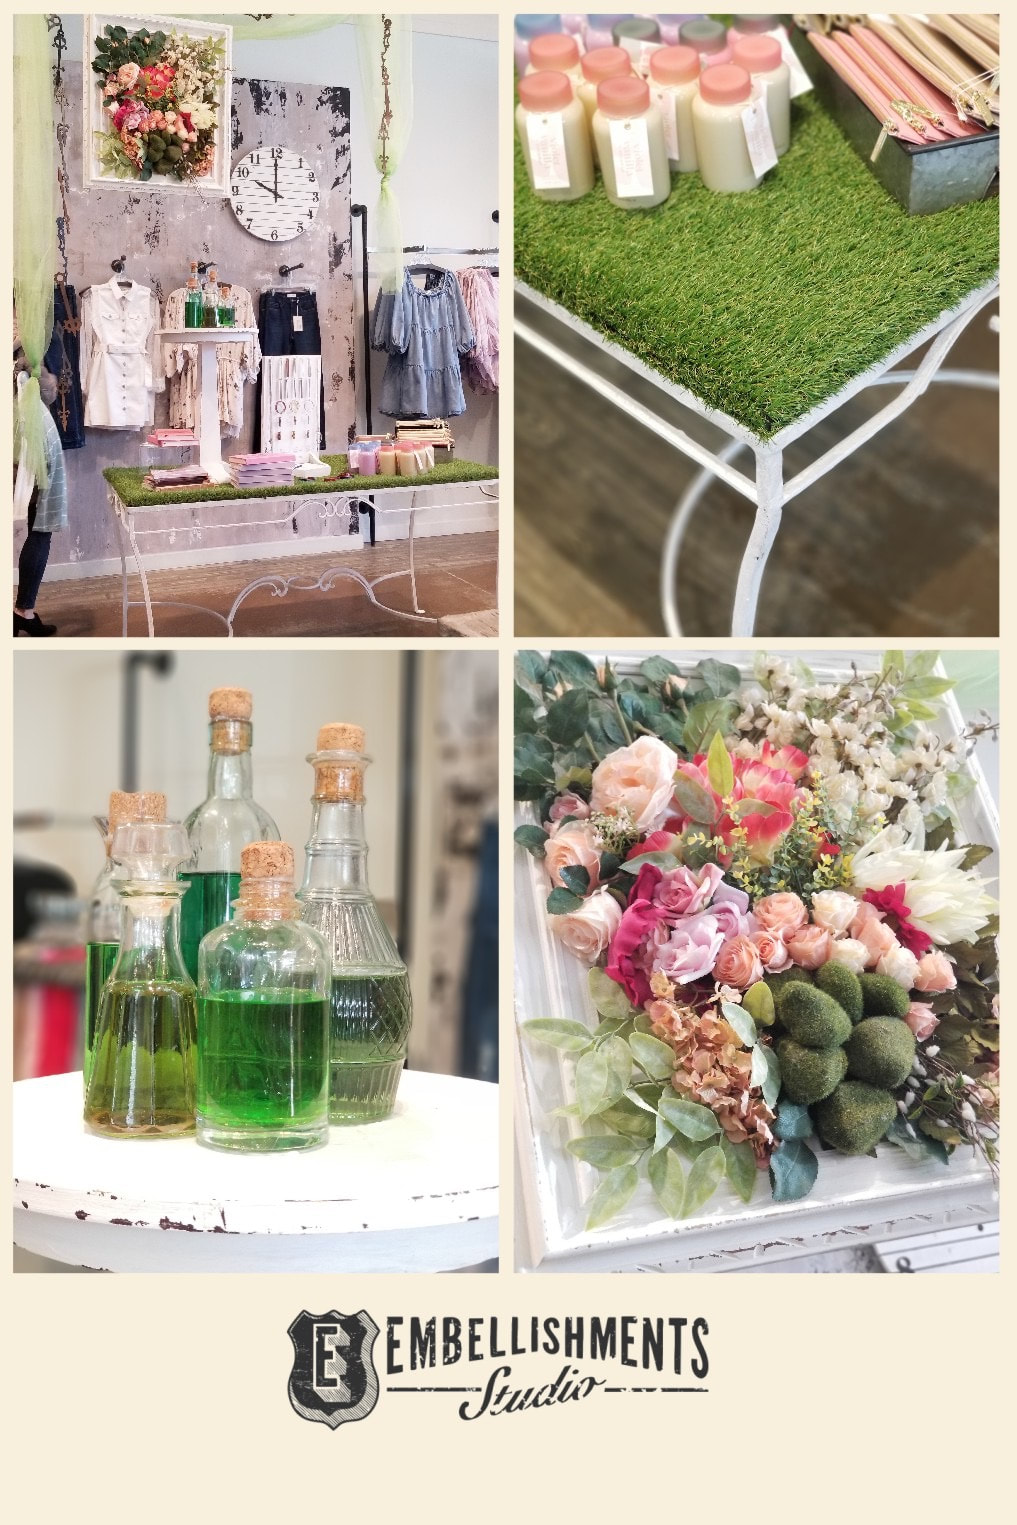 Wonderland Spring Store Display with great ideas for a garden party or wedding.